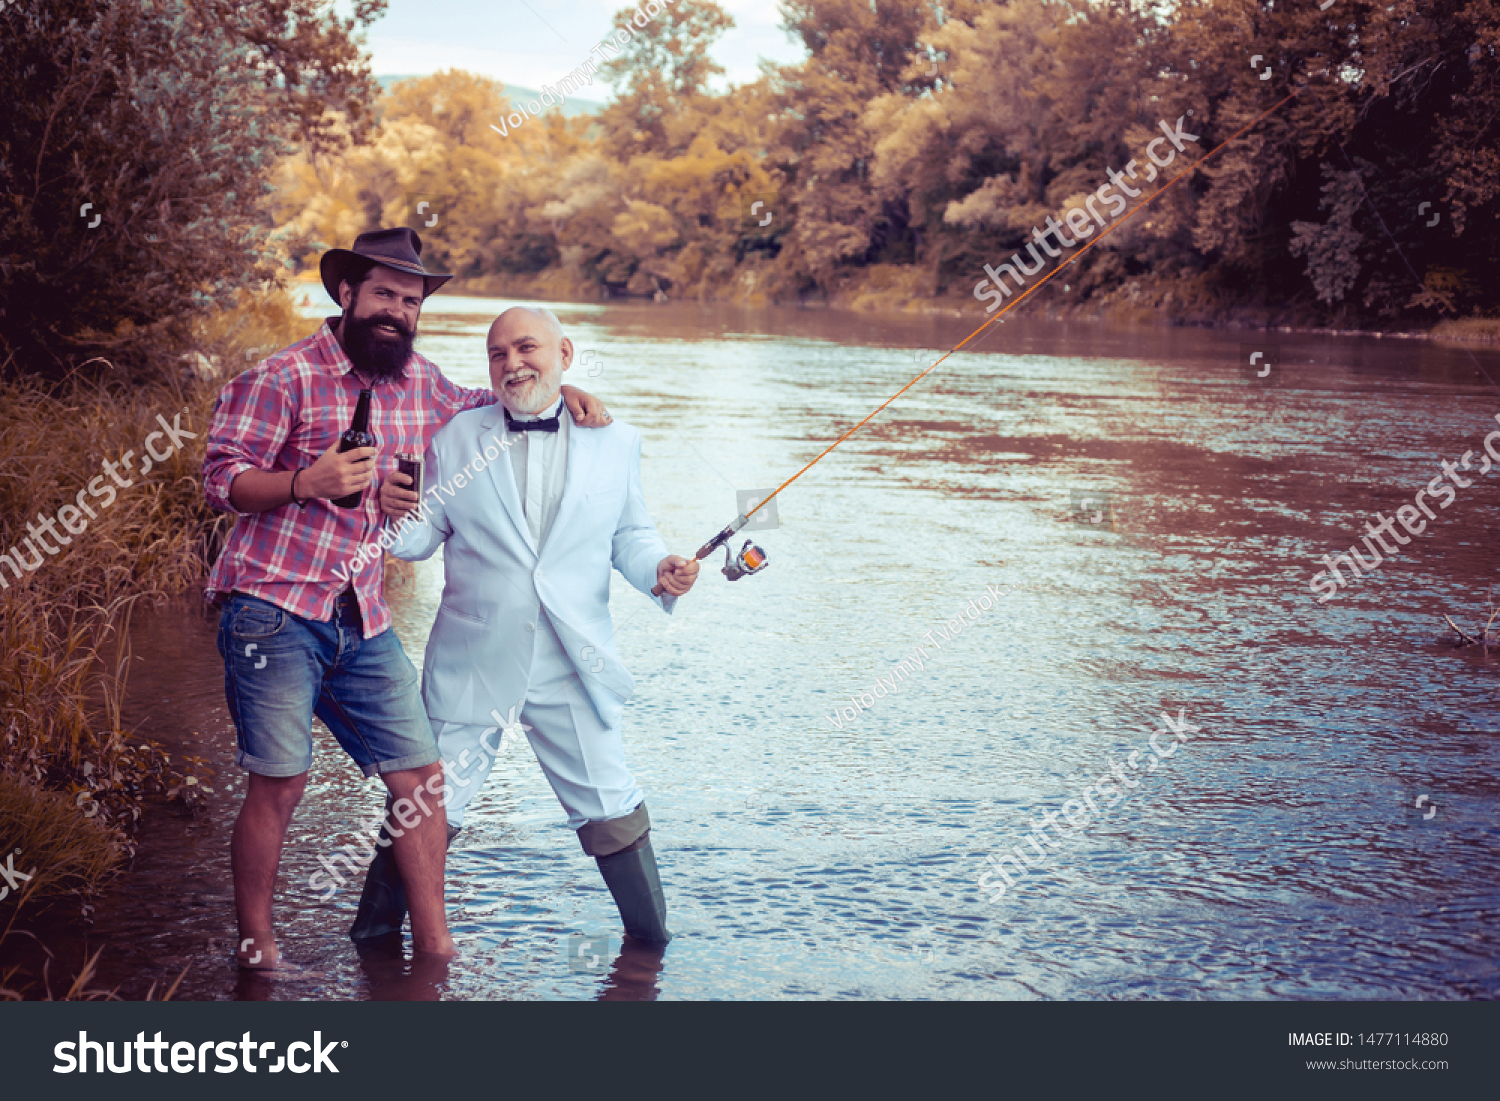 Fly fishing is most renowned as a method for catching trout grayling and salmon. Fly fisherman using fly fishing rod in beautiful river. Man fisherman catches a fish #1477114880